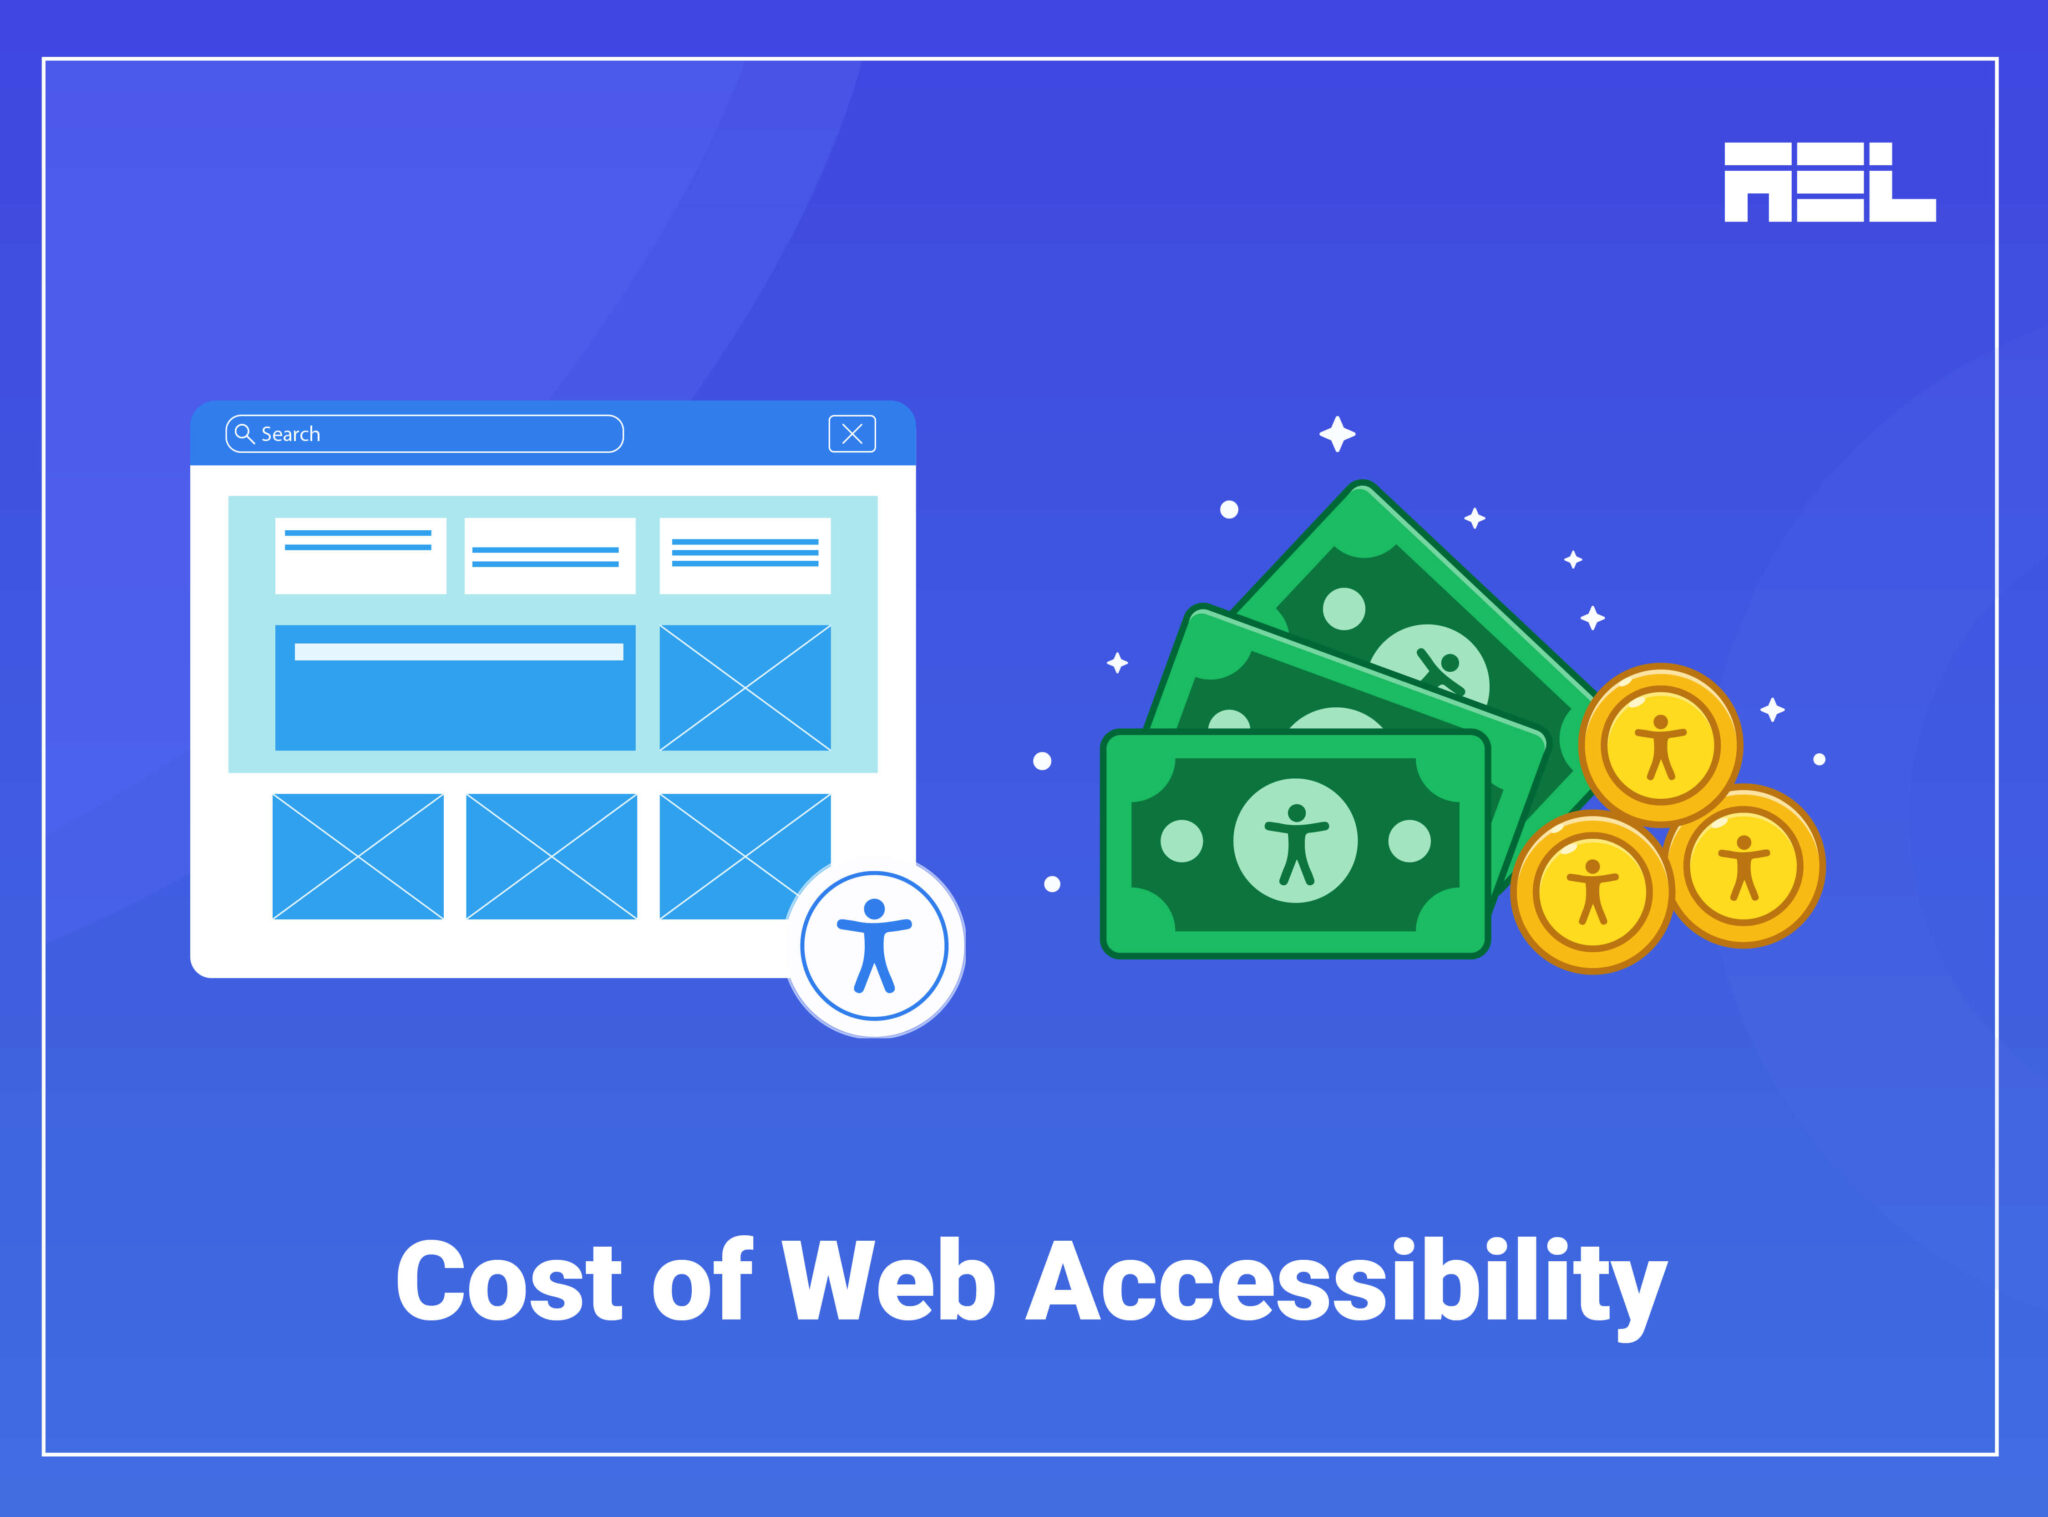 Shows Cost of Web Accessibility